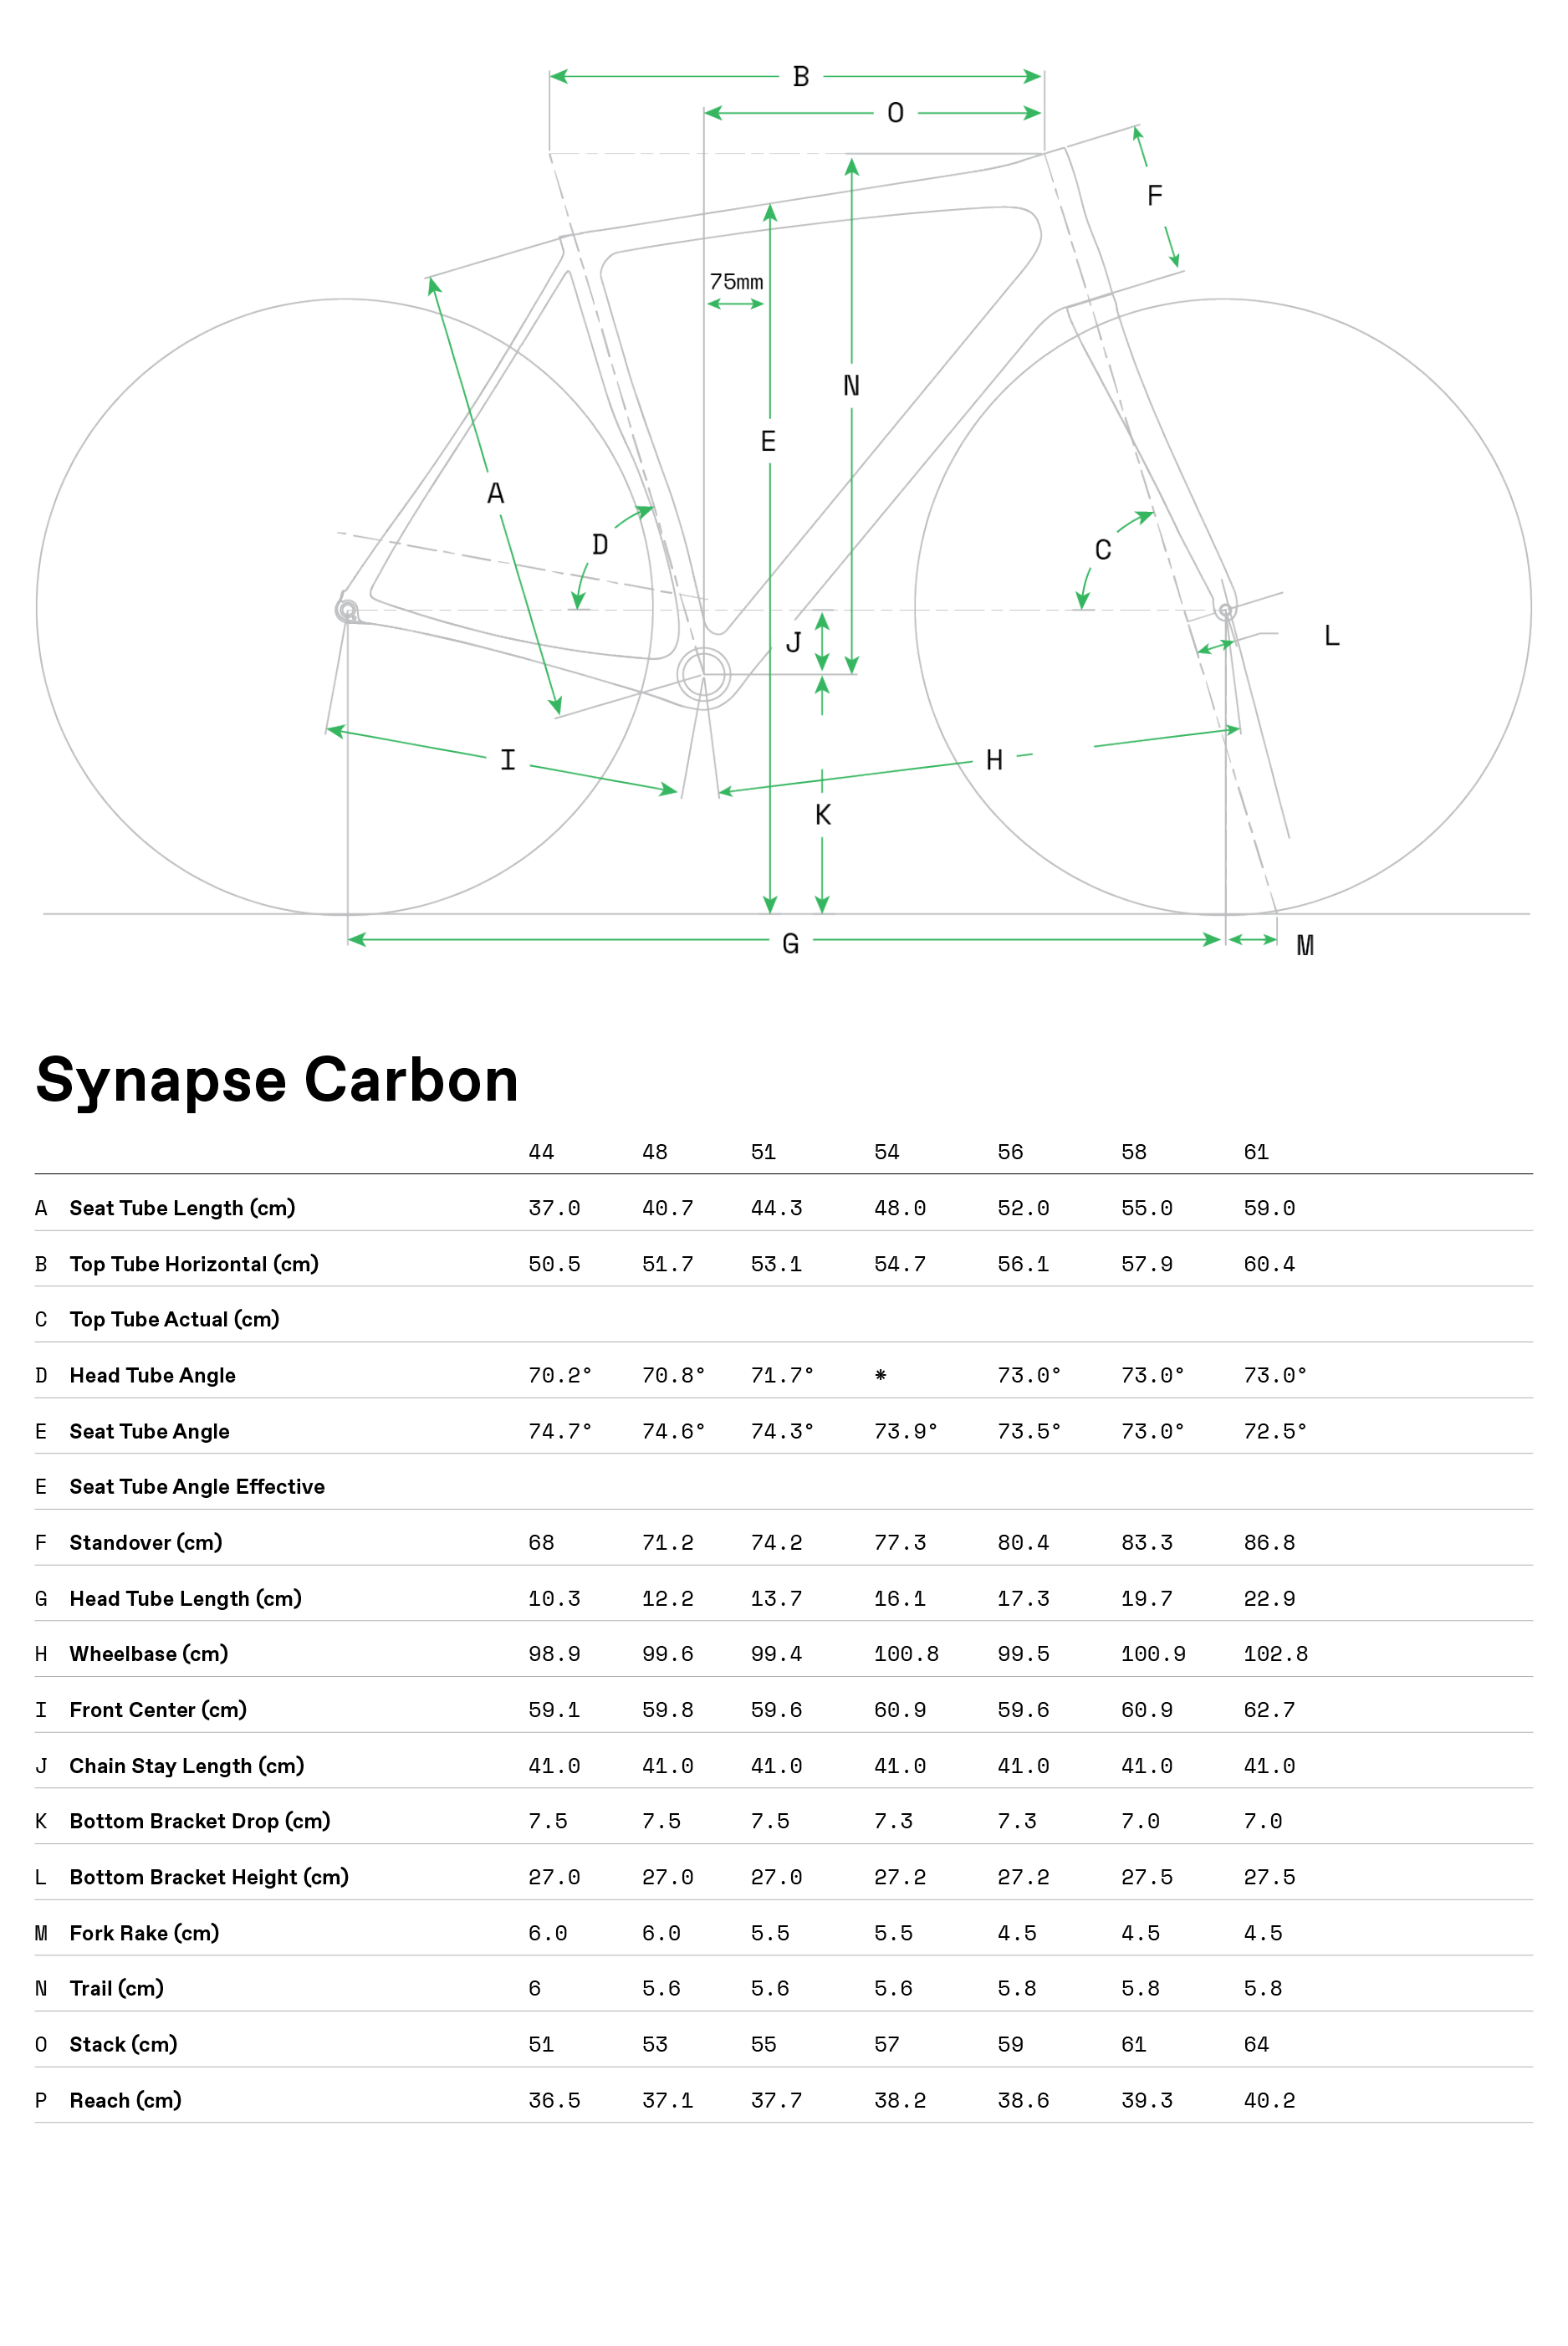 synapse carbon geo table